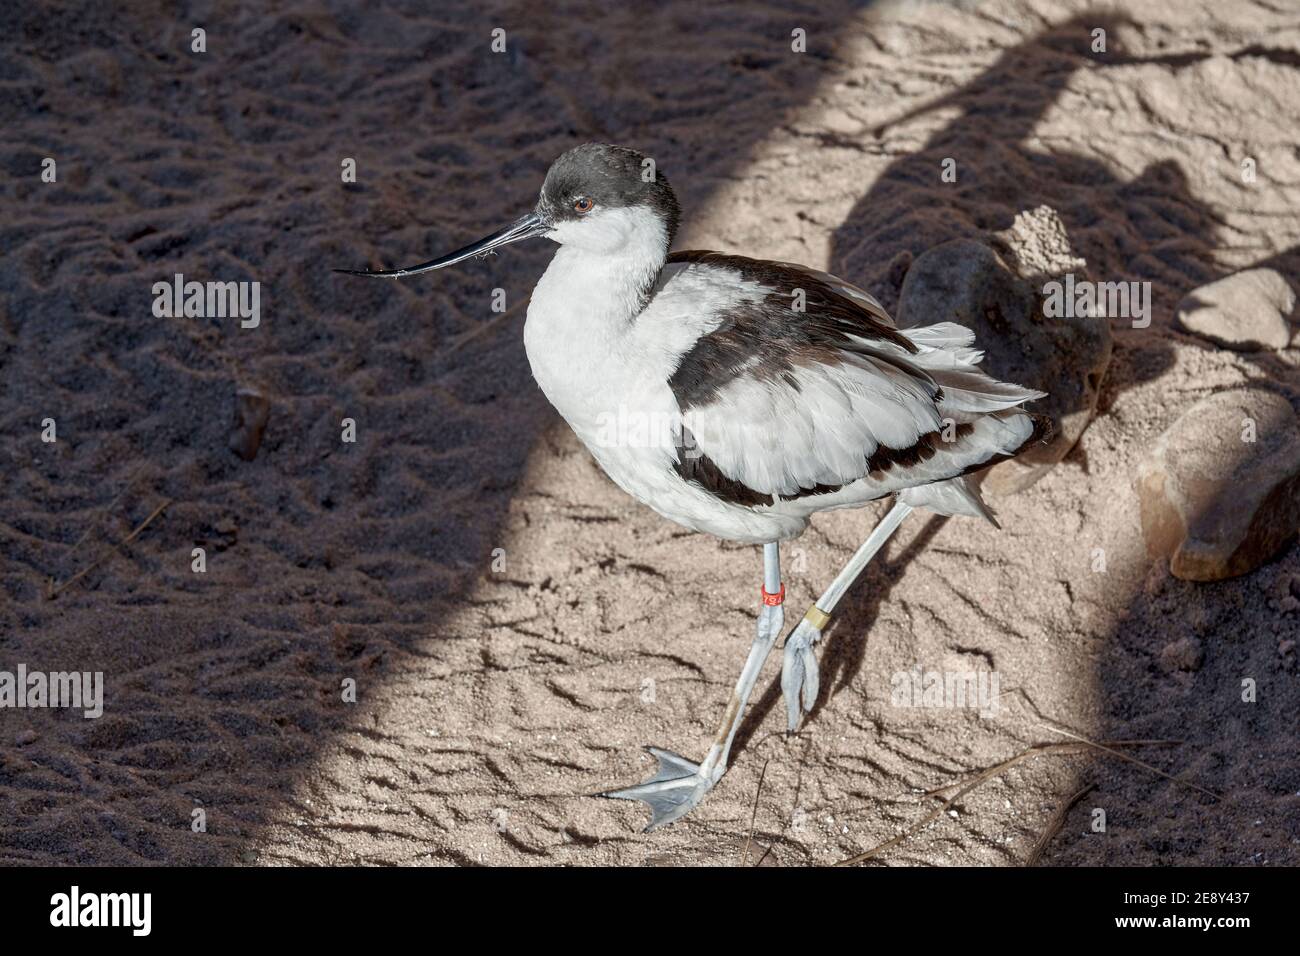 The common avocet, a wading bird with black and white plumage that is characterized by its beak curved upwards in the oceanographic of Valencia, Spain Stock Photo